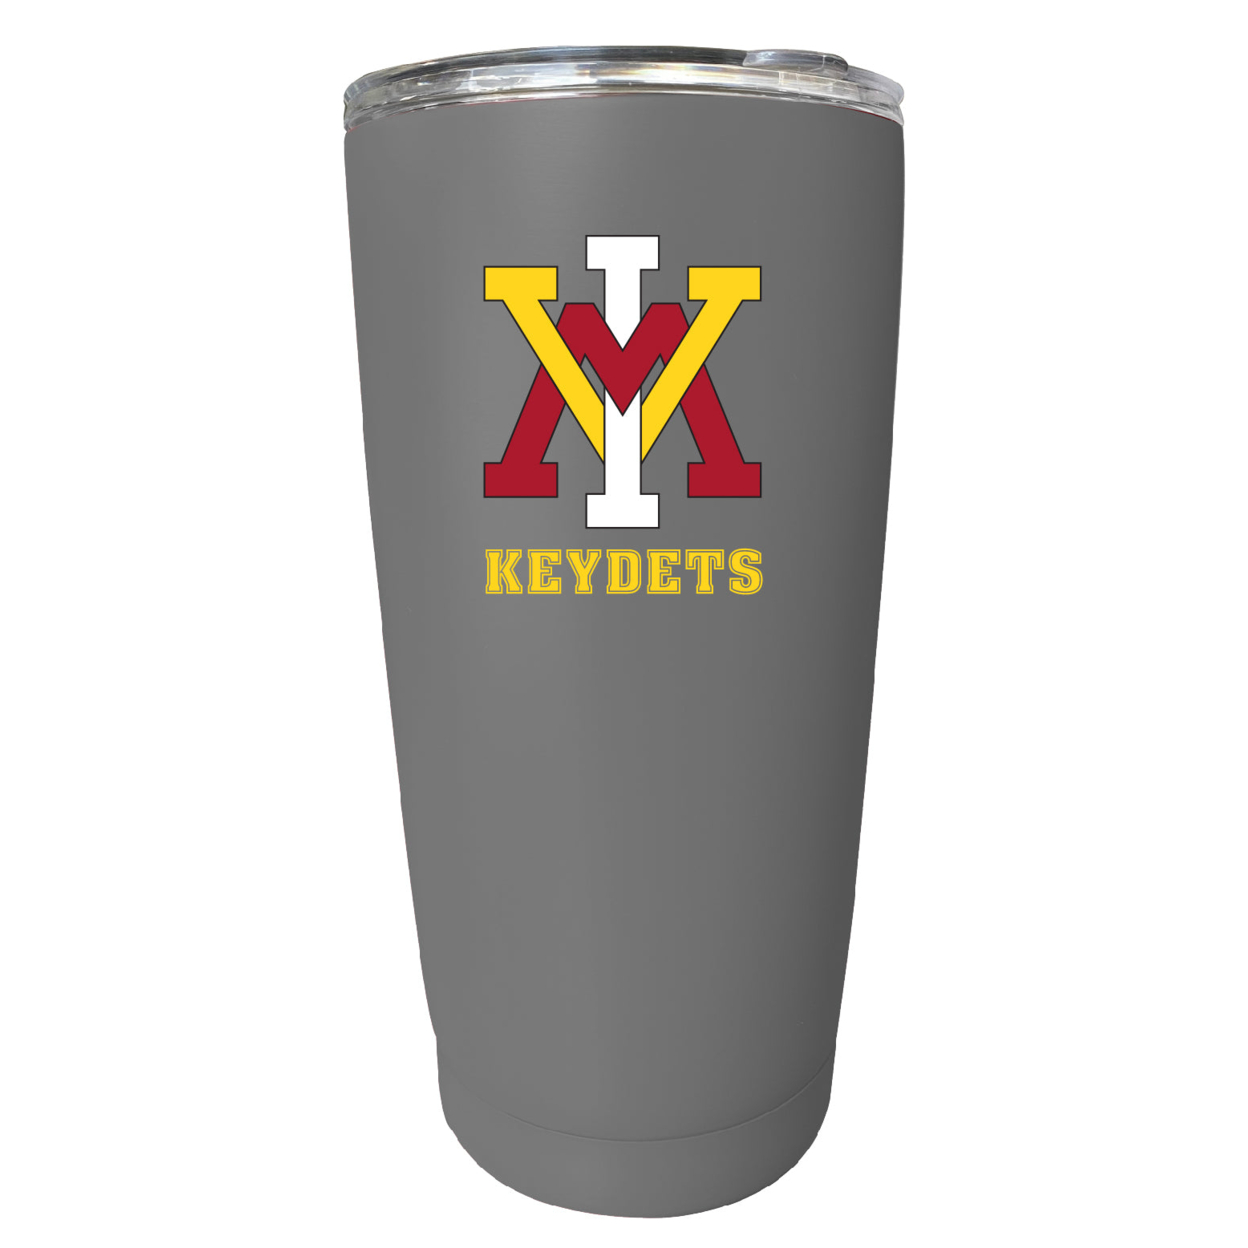 VMI Keydets 16 Oz Stainless Steel Insulated Tumbler - Gray